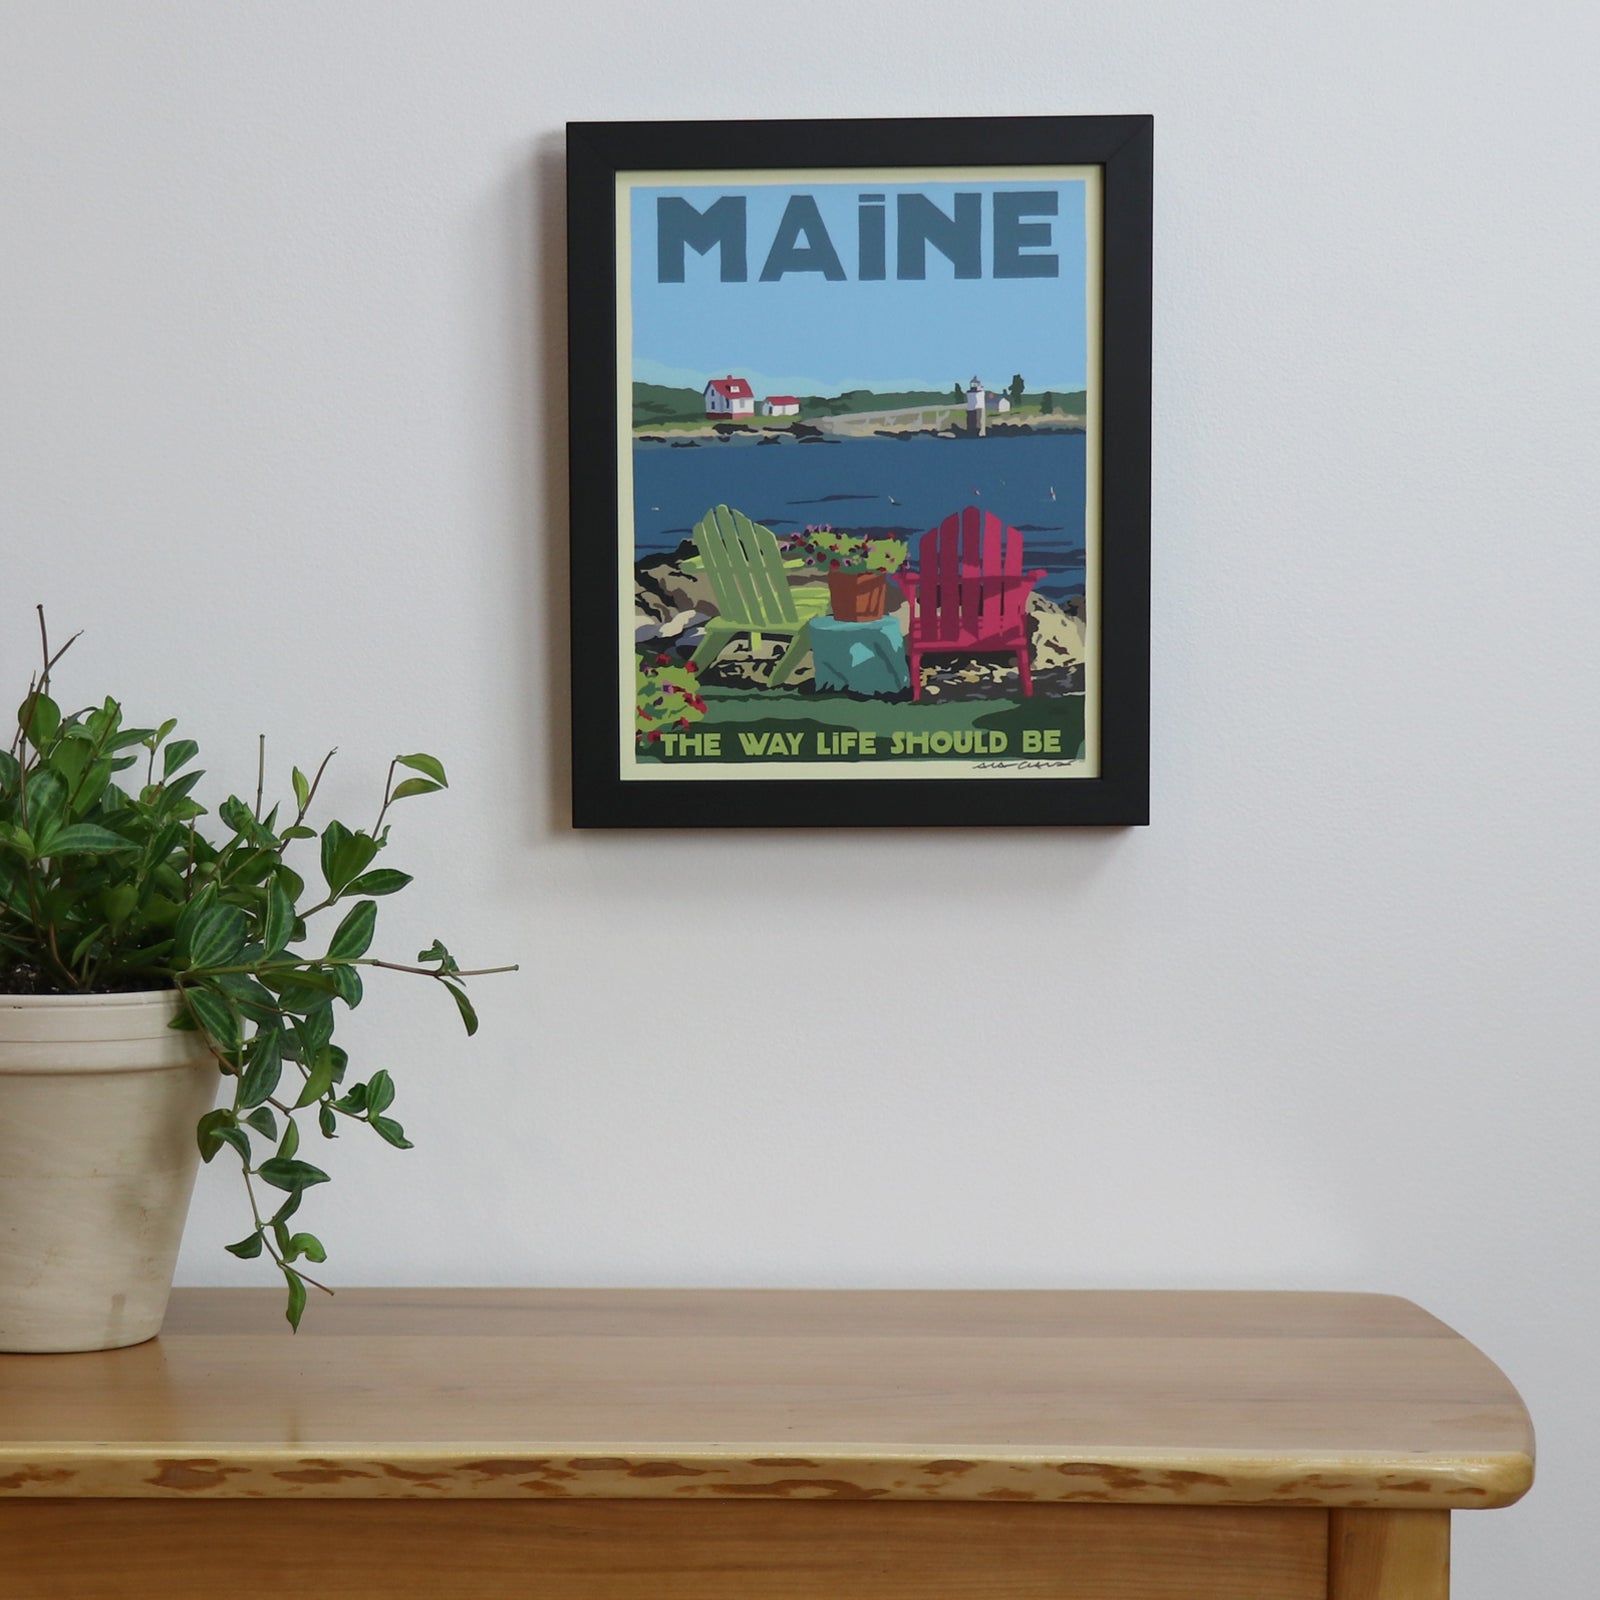 Chairs Overlooking Ram Island - Maine The Way Life Should Be Art Print 8" x 10" Framed Travel Poster